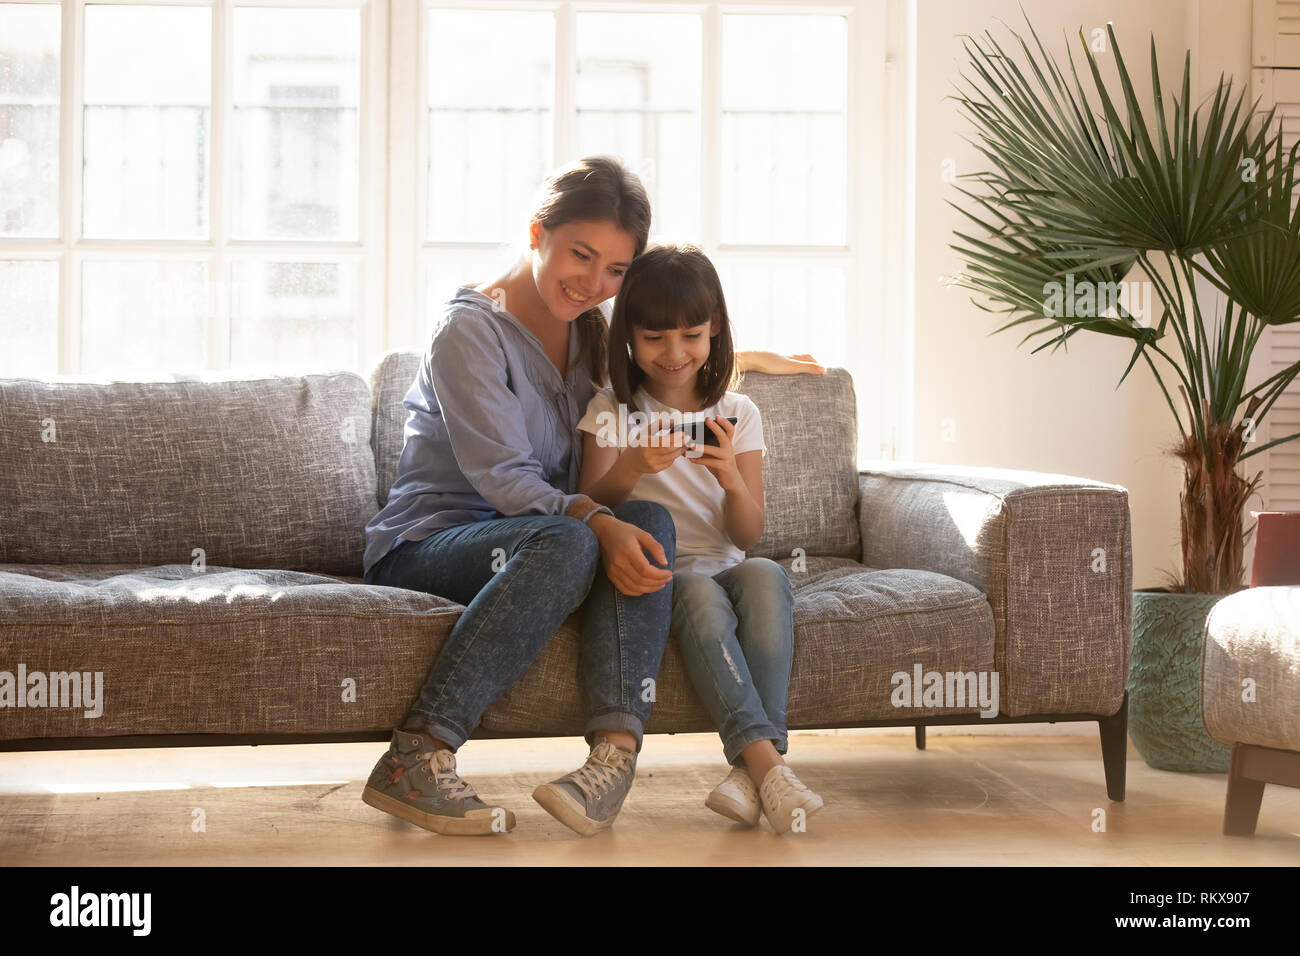 Happy mom and kid daughter using smartphone sitting on couch Stock Photo